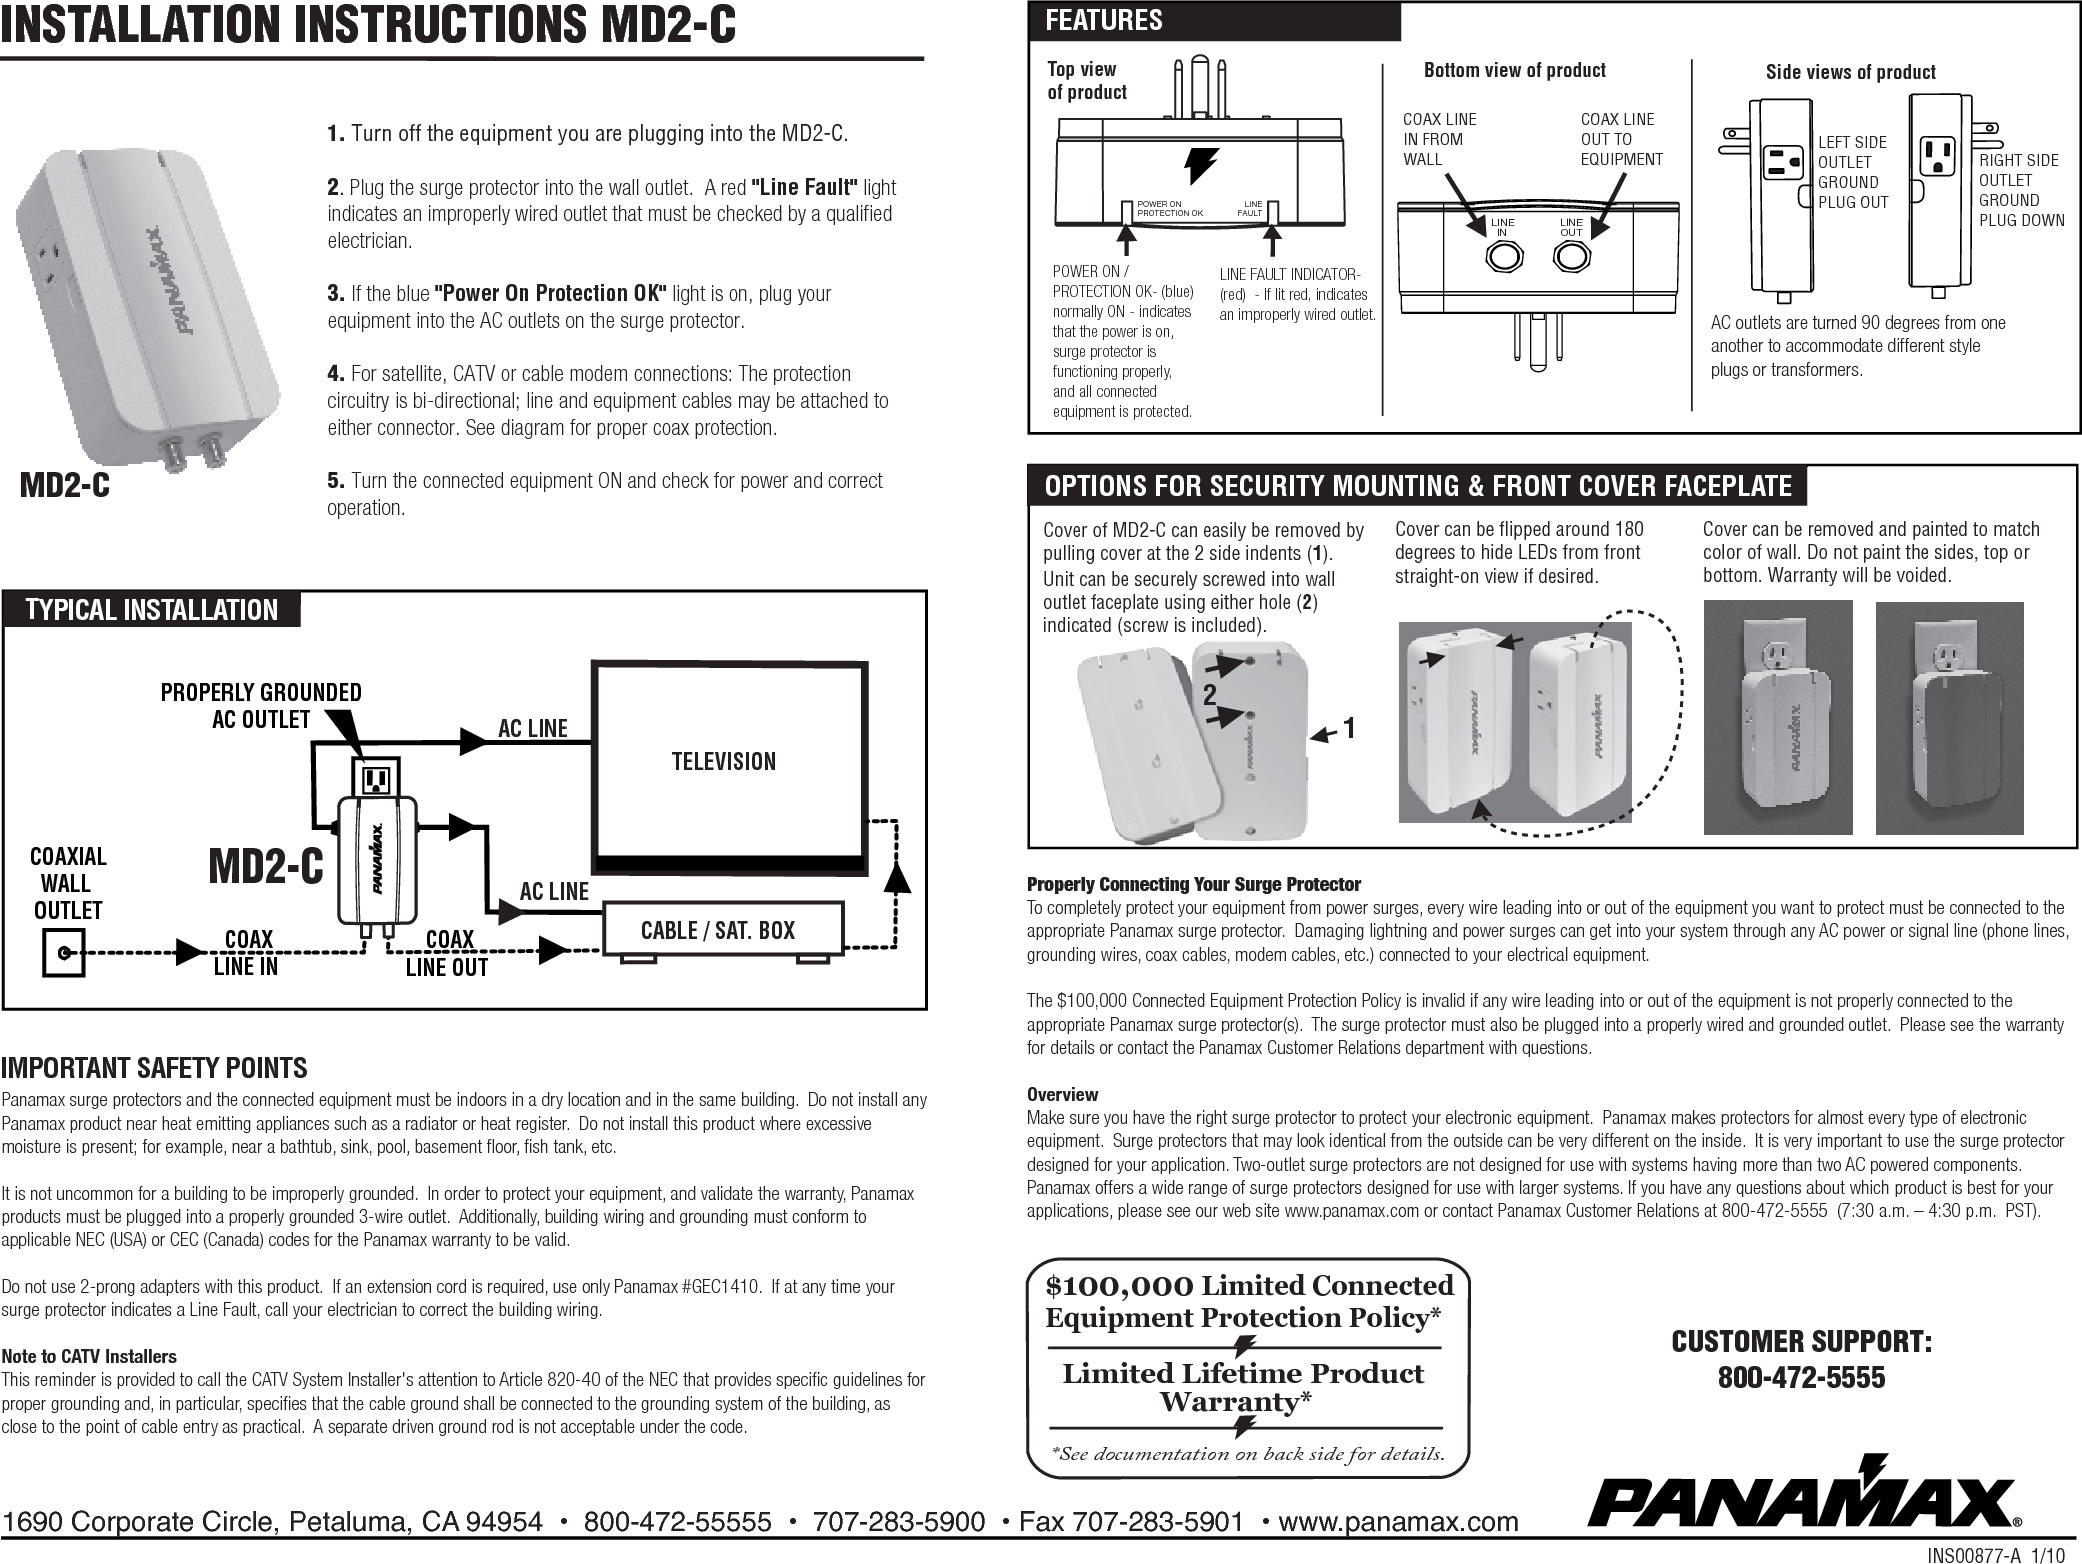 Page 1 of 2 - Pdf Md2-C Manual MD2-C-INS00877-A User